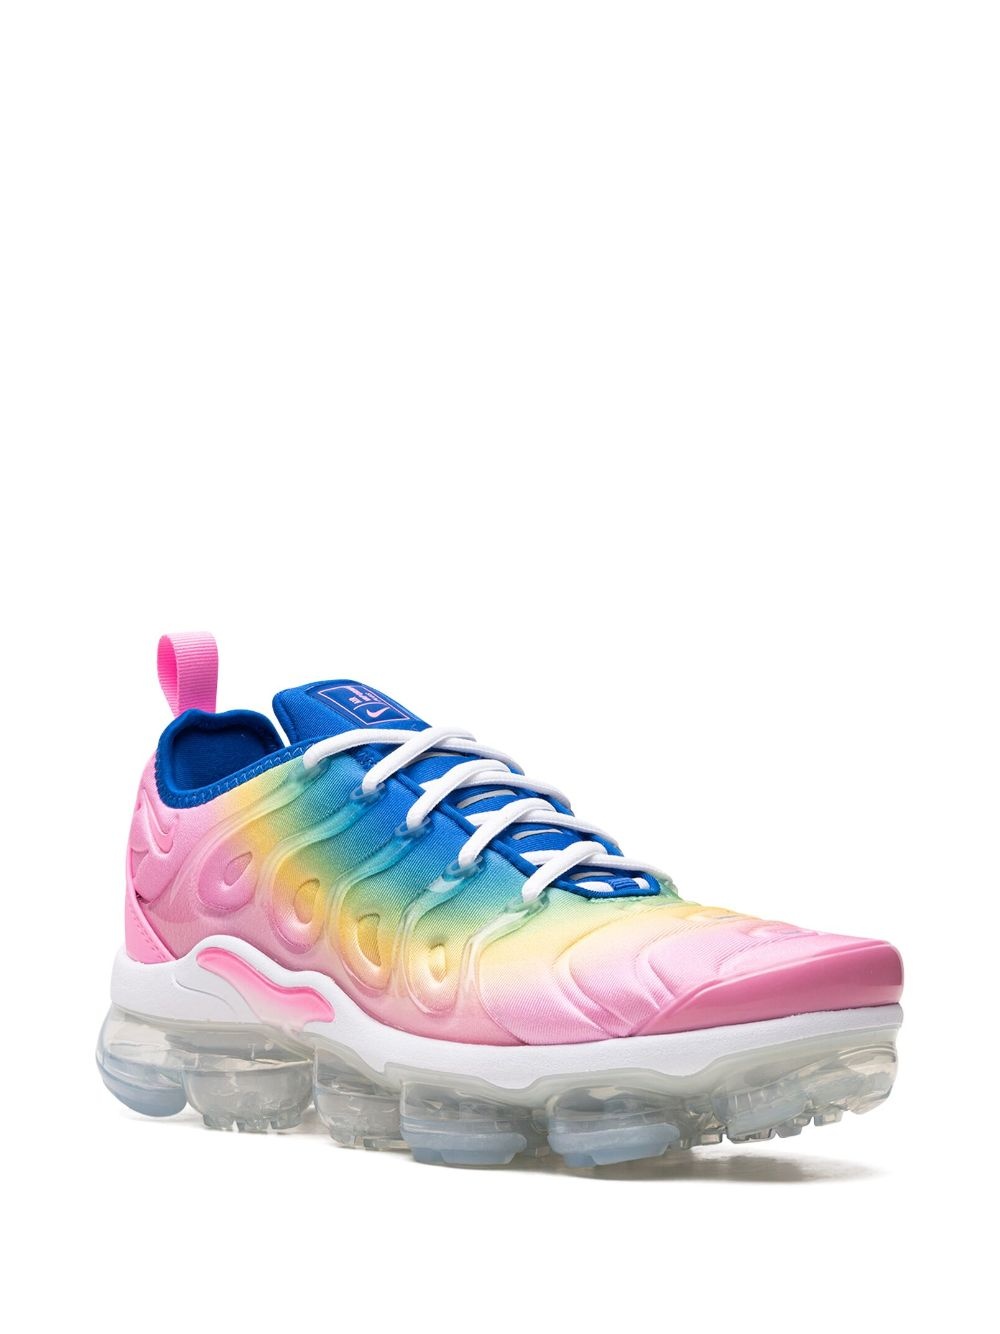 Air VaporMax Plus "Cotton Candy Rainbow" sneakers - 2